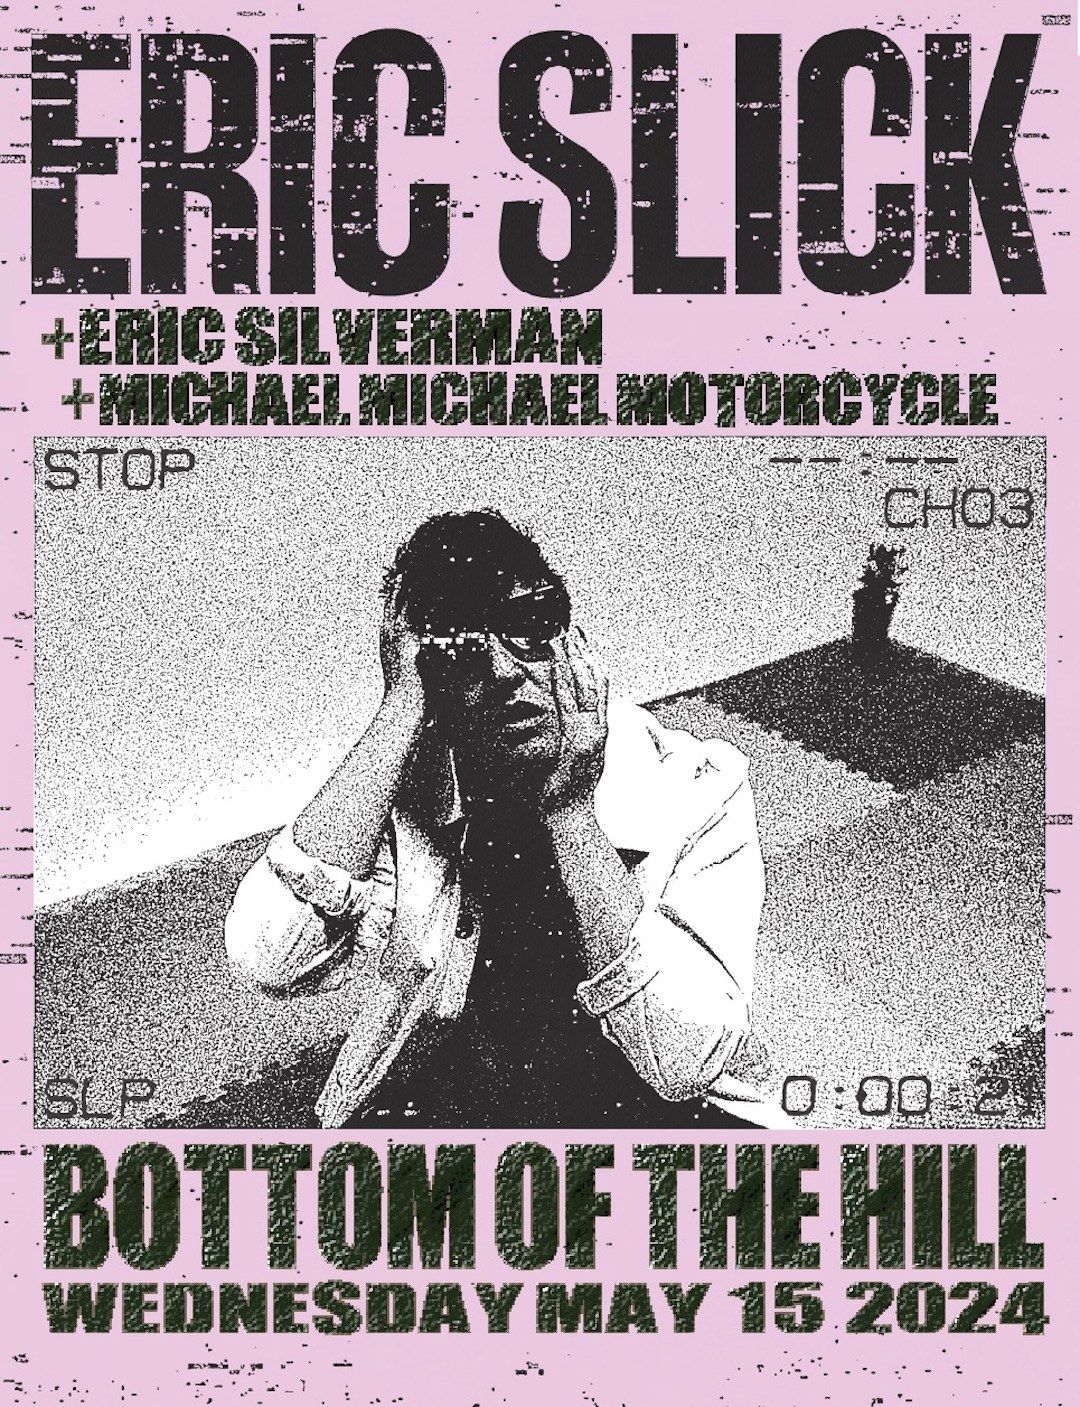 Eric Slick {of Dr. Dog - RECORD RELEASE} ~ Eric Silverman ~ Michael Michael Motorcycle